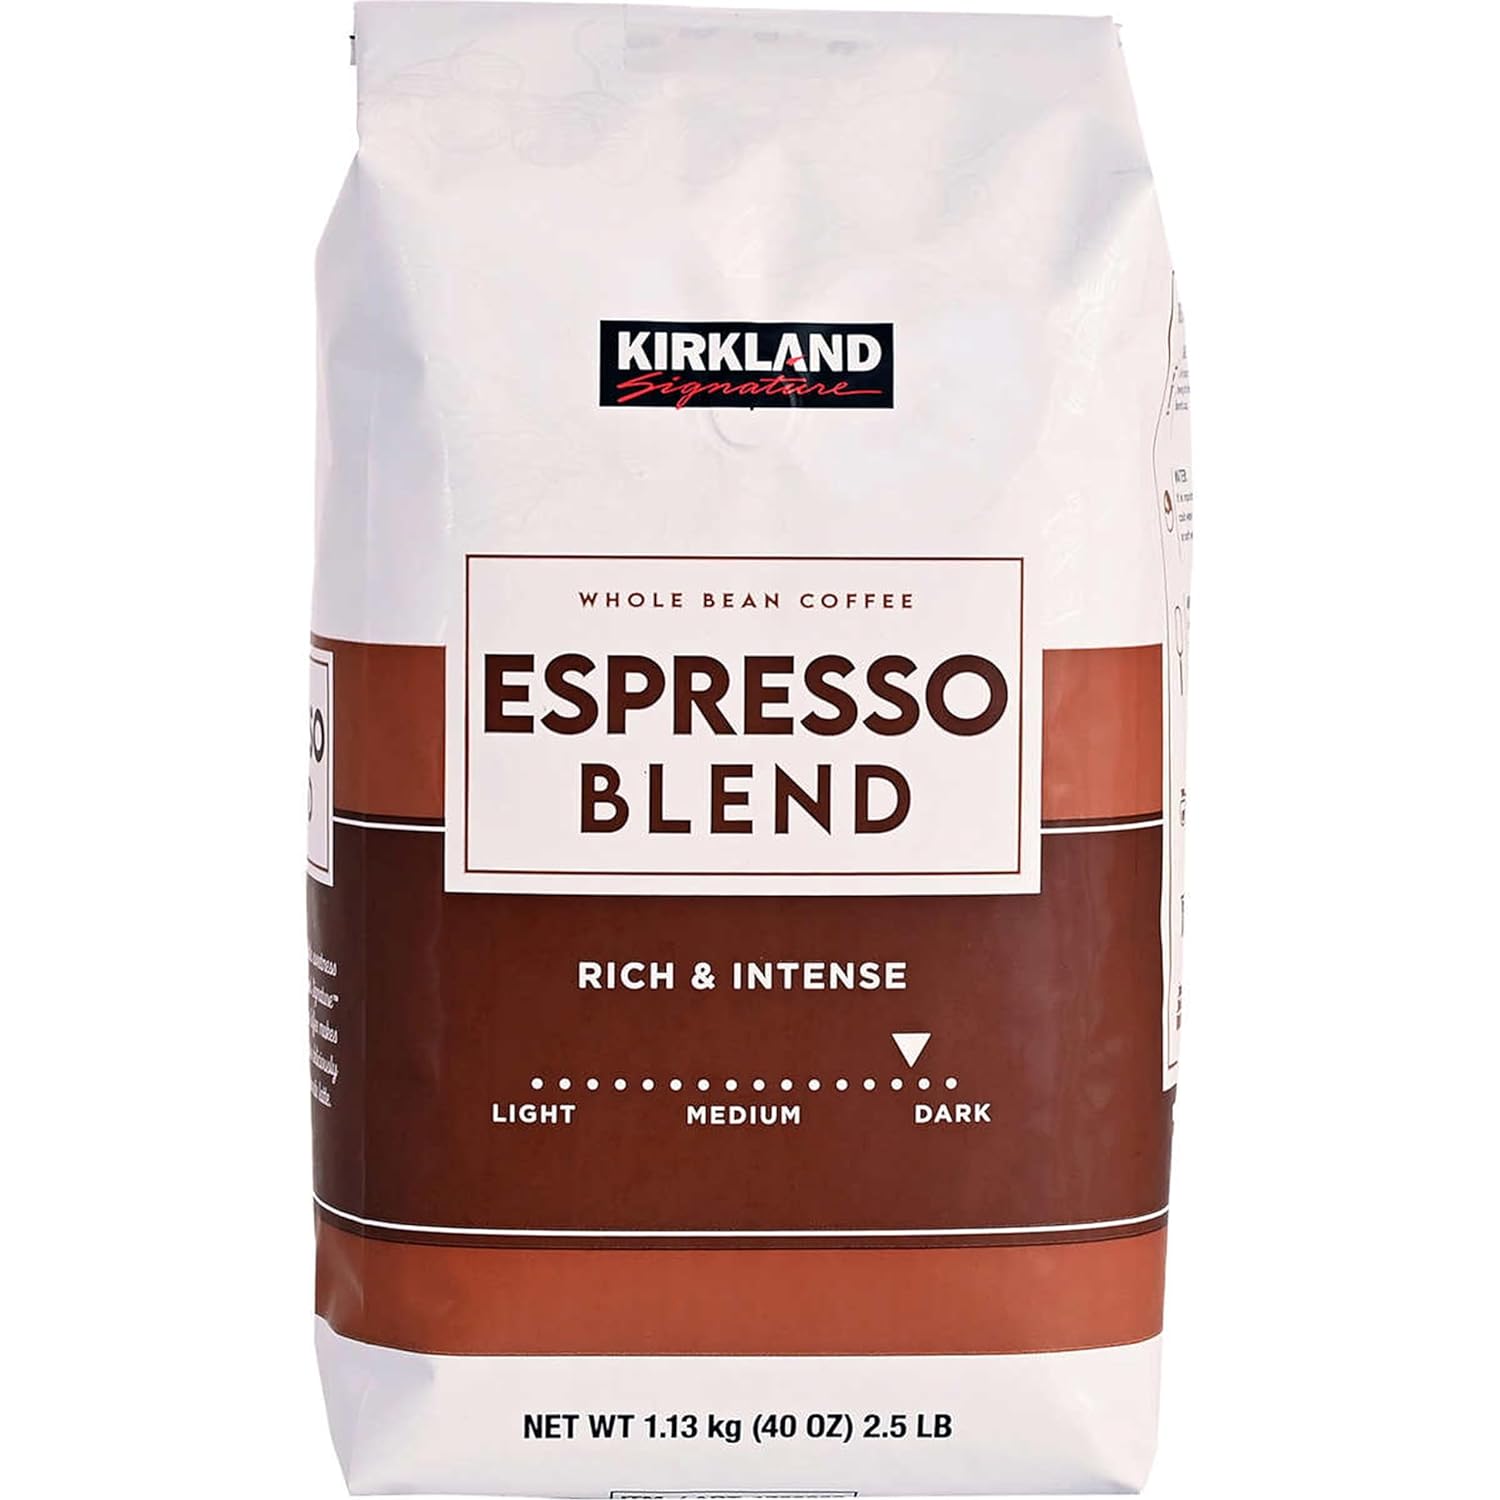  I don't drink coffee but my husband does so I ordered this for him as a Christmas present. He just opened it today and says it' fabulous. He' so pleased with it, it was worth the cost and I'll order it for him again in the future. Based on his enjoyment, I recommend this for coffee lovers! 